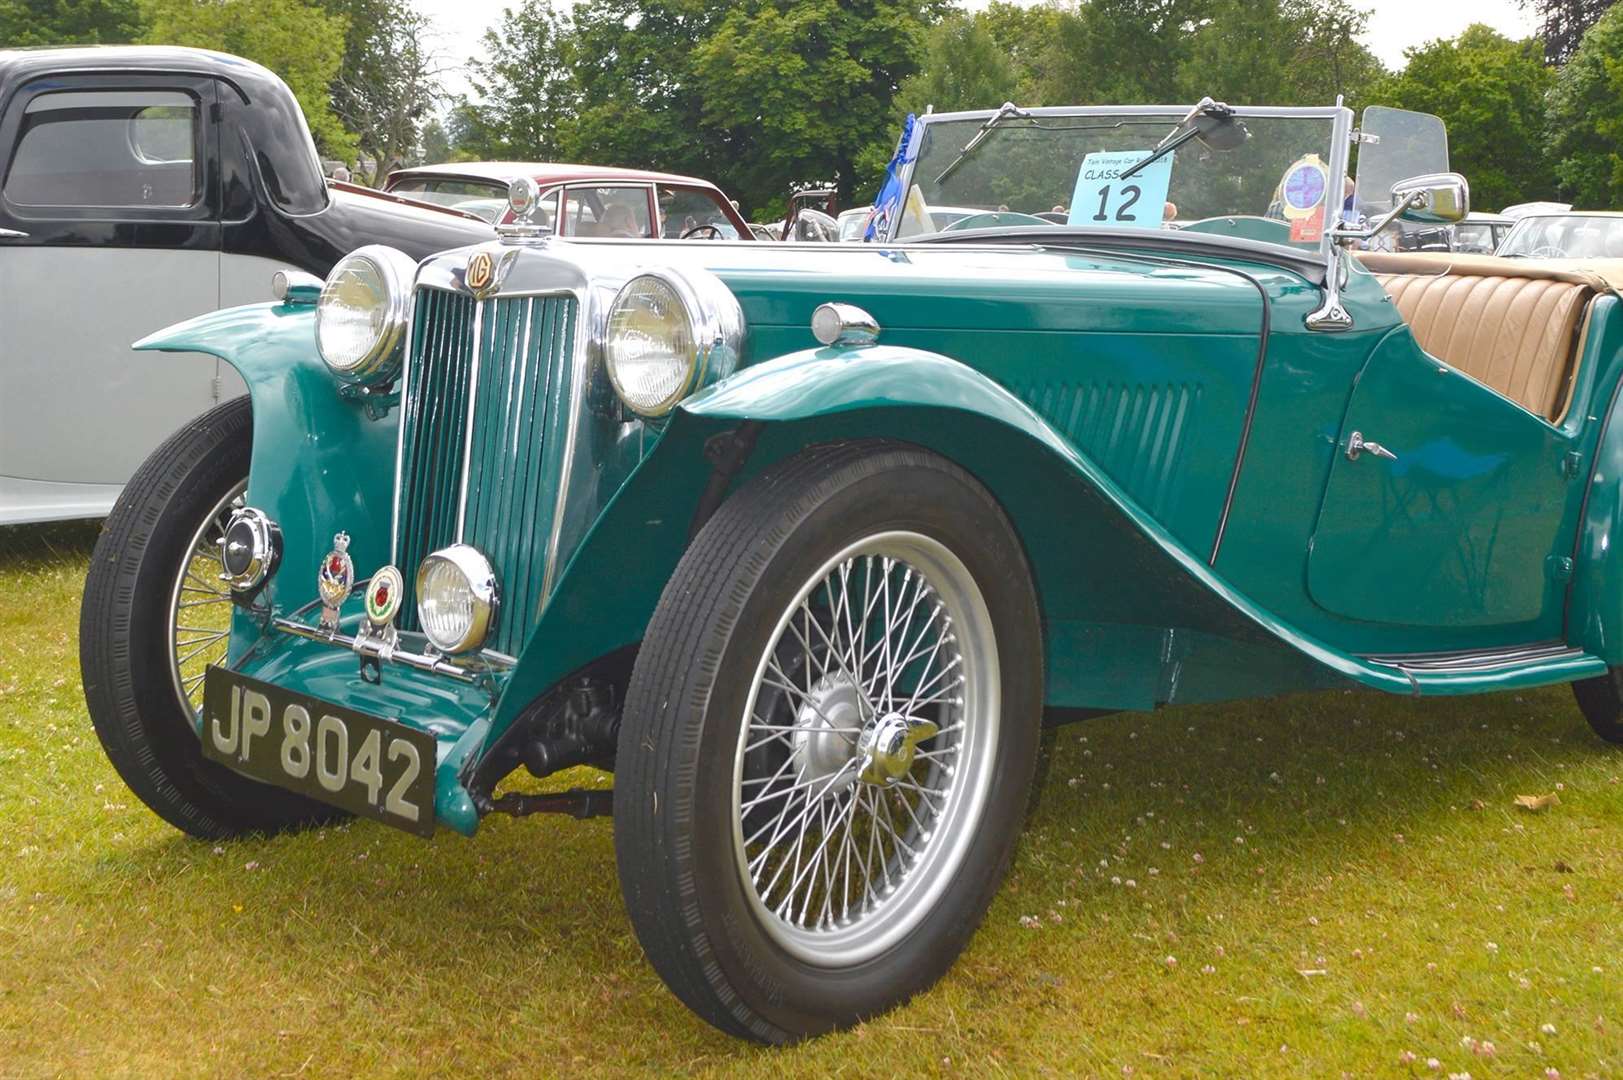 The car rally will have fascinating vehicles from years gone by on display.